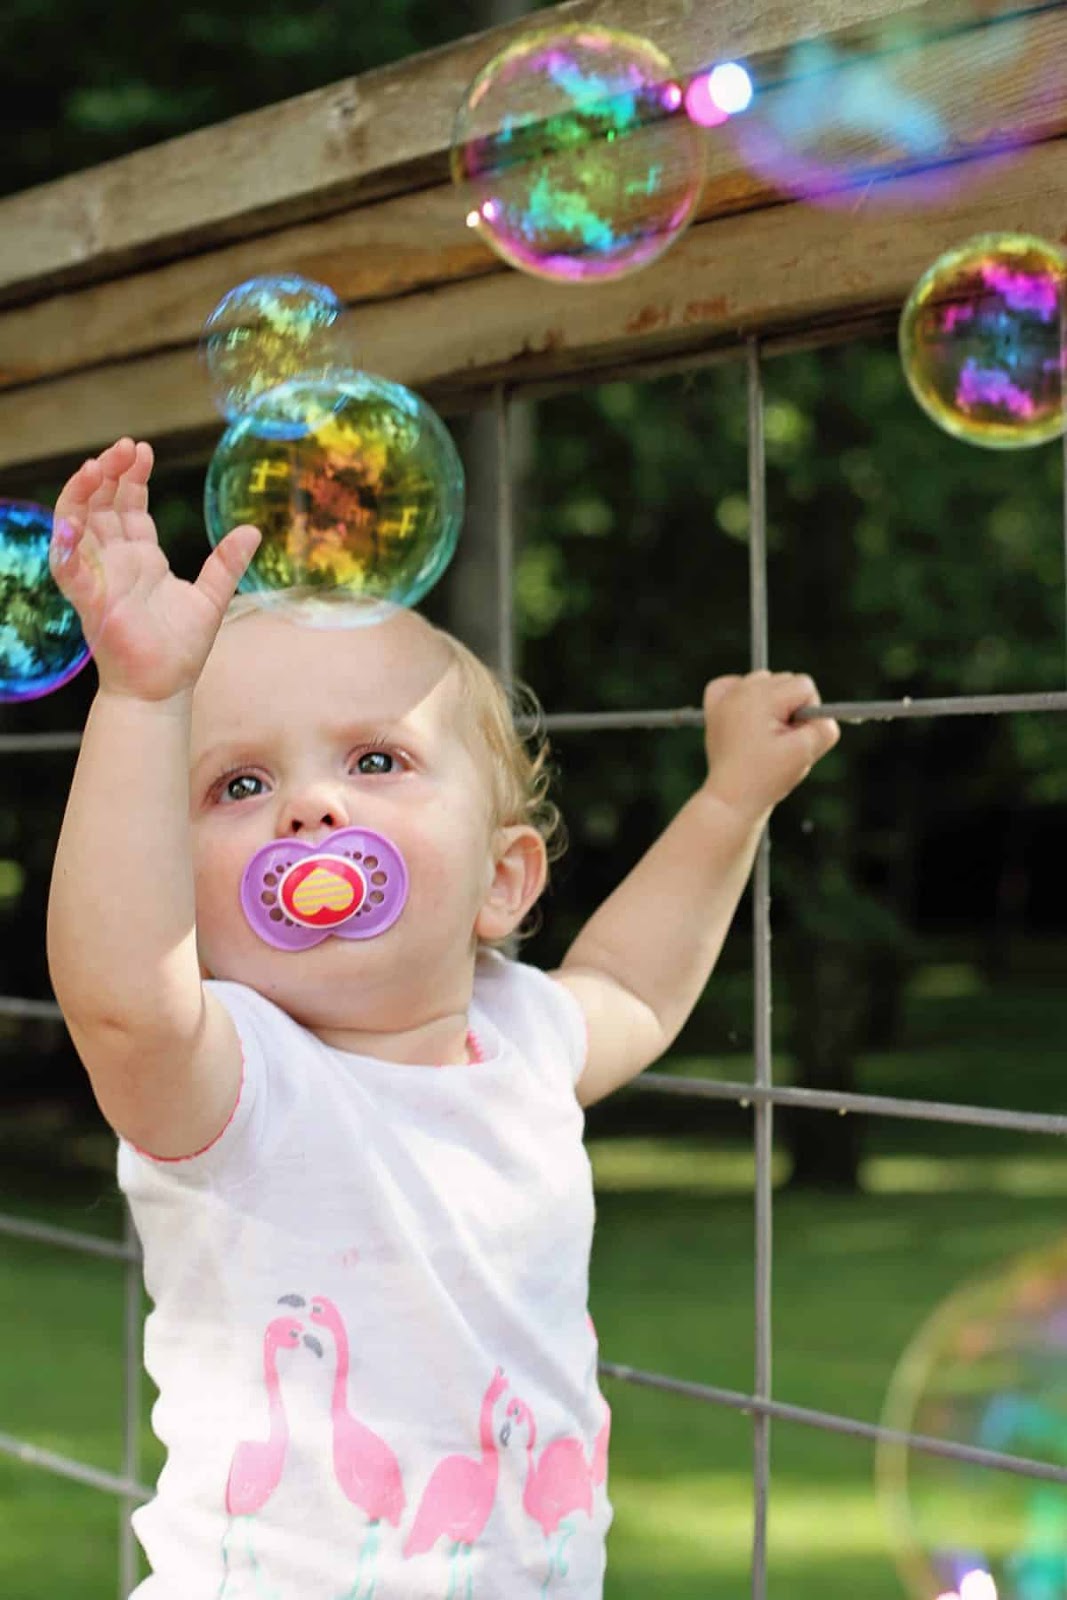 easy outdoor activities for babies - playing with bubbles